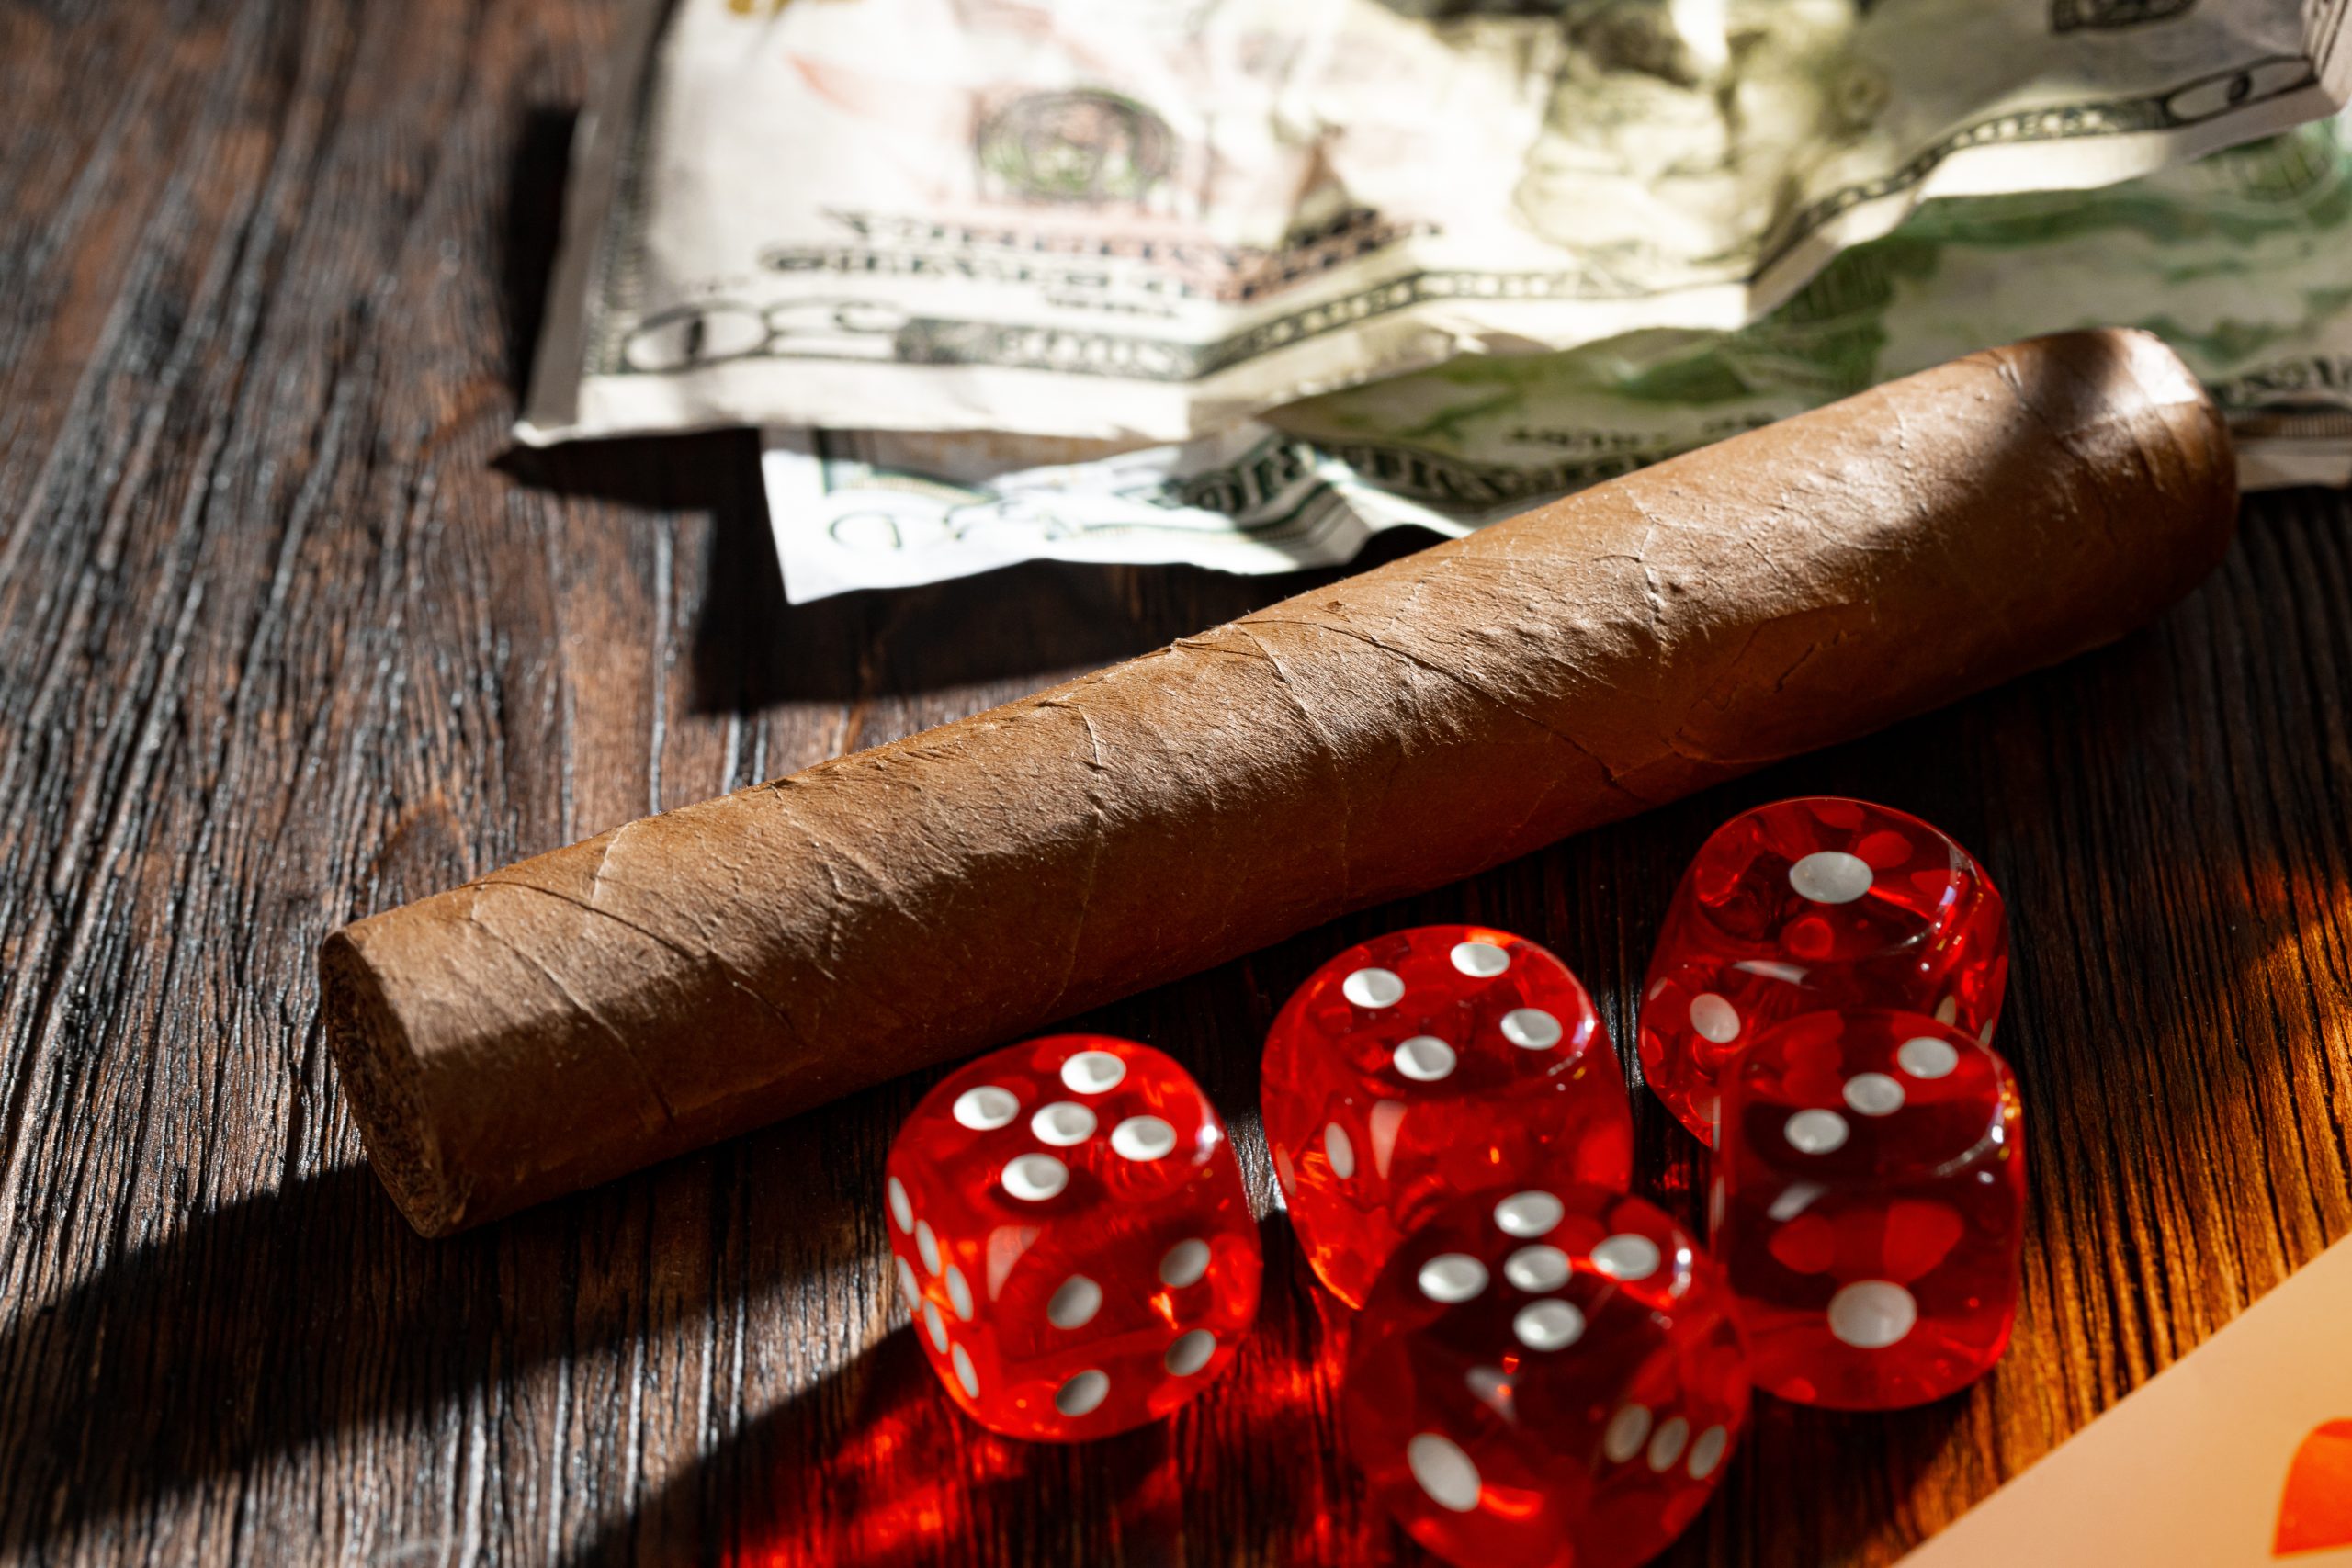 The Top 5 Strategies For Beating Online Betting